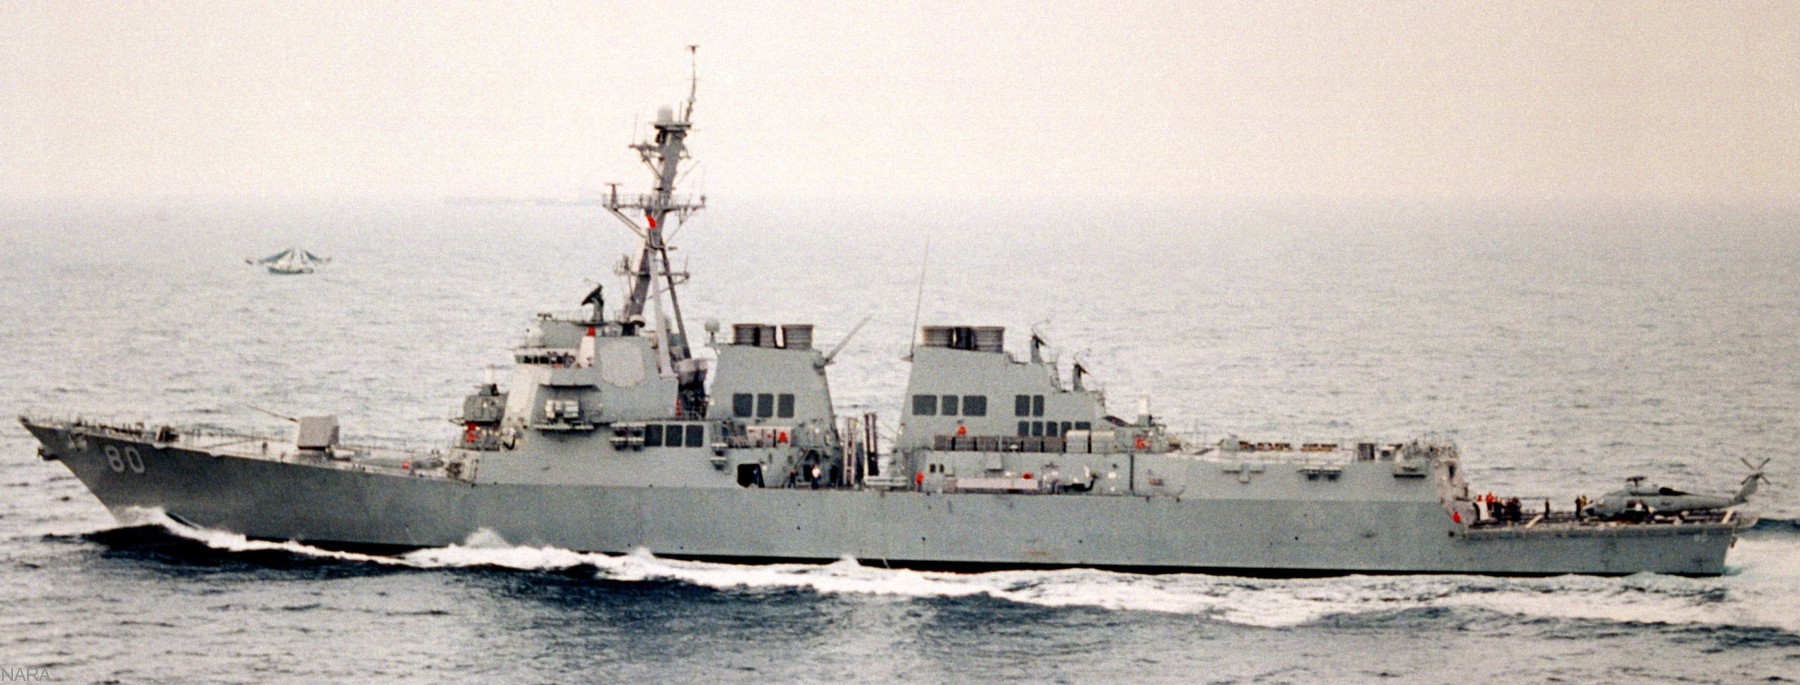 ddg-80 uss roosevelt guided missile destroyer arleigh burke class us navy trials ingalls 06